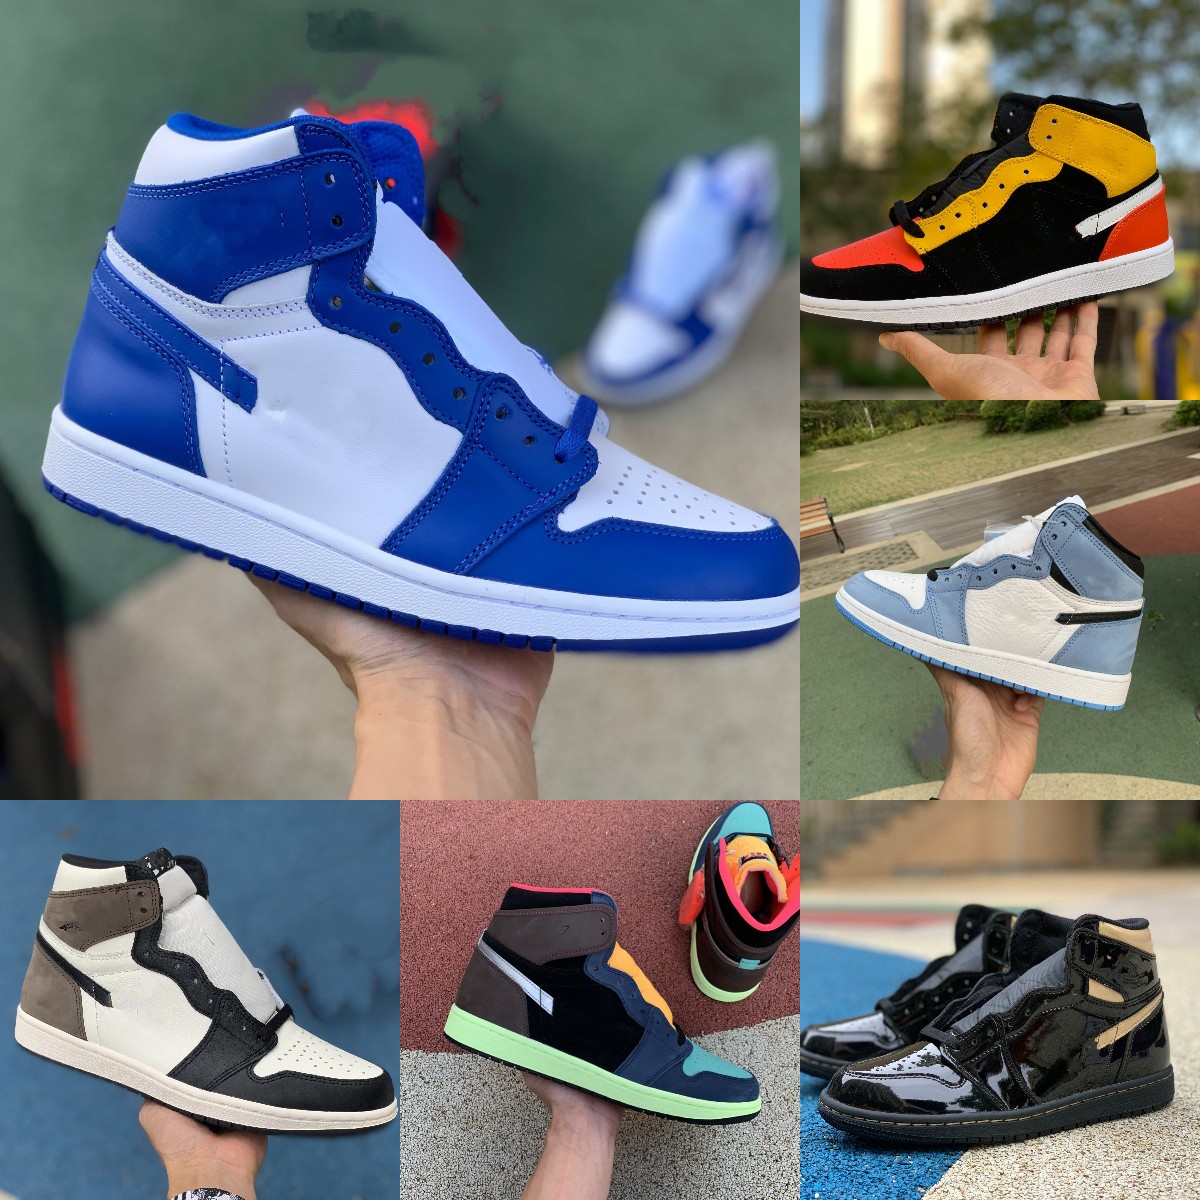 

Men Women Casual Shoes Jumpman 1 Casual Shoes 1s High Og Crimson Tint Chicago Light Smoke Grey Shadow Obsidian Rookie Of The Year Bred Toe Green Court Purple C01, Shua